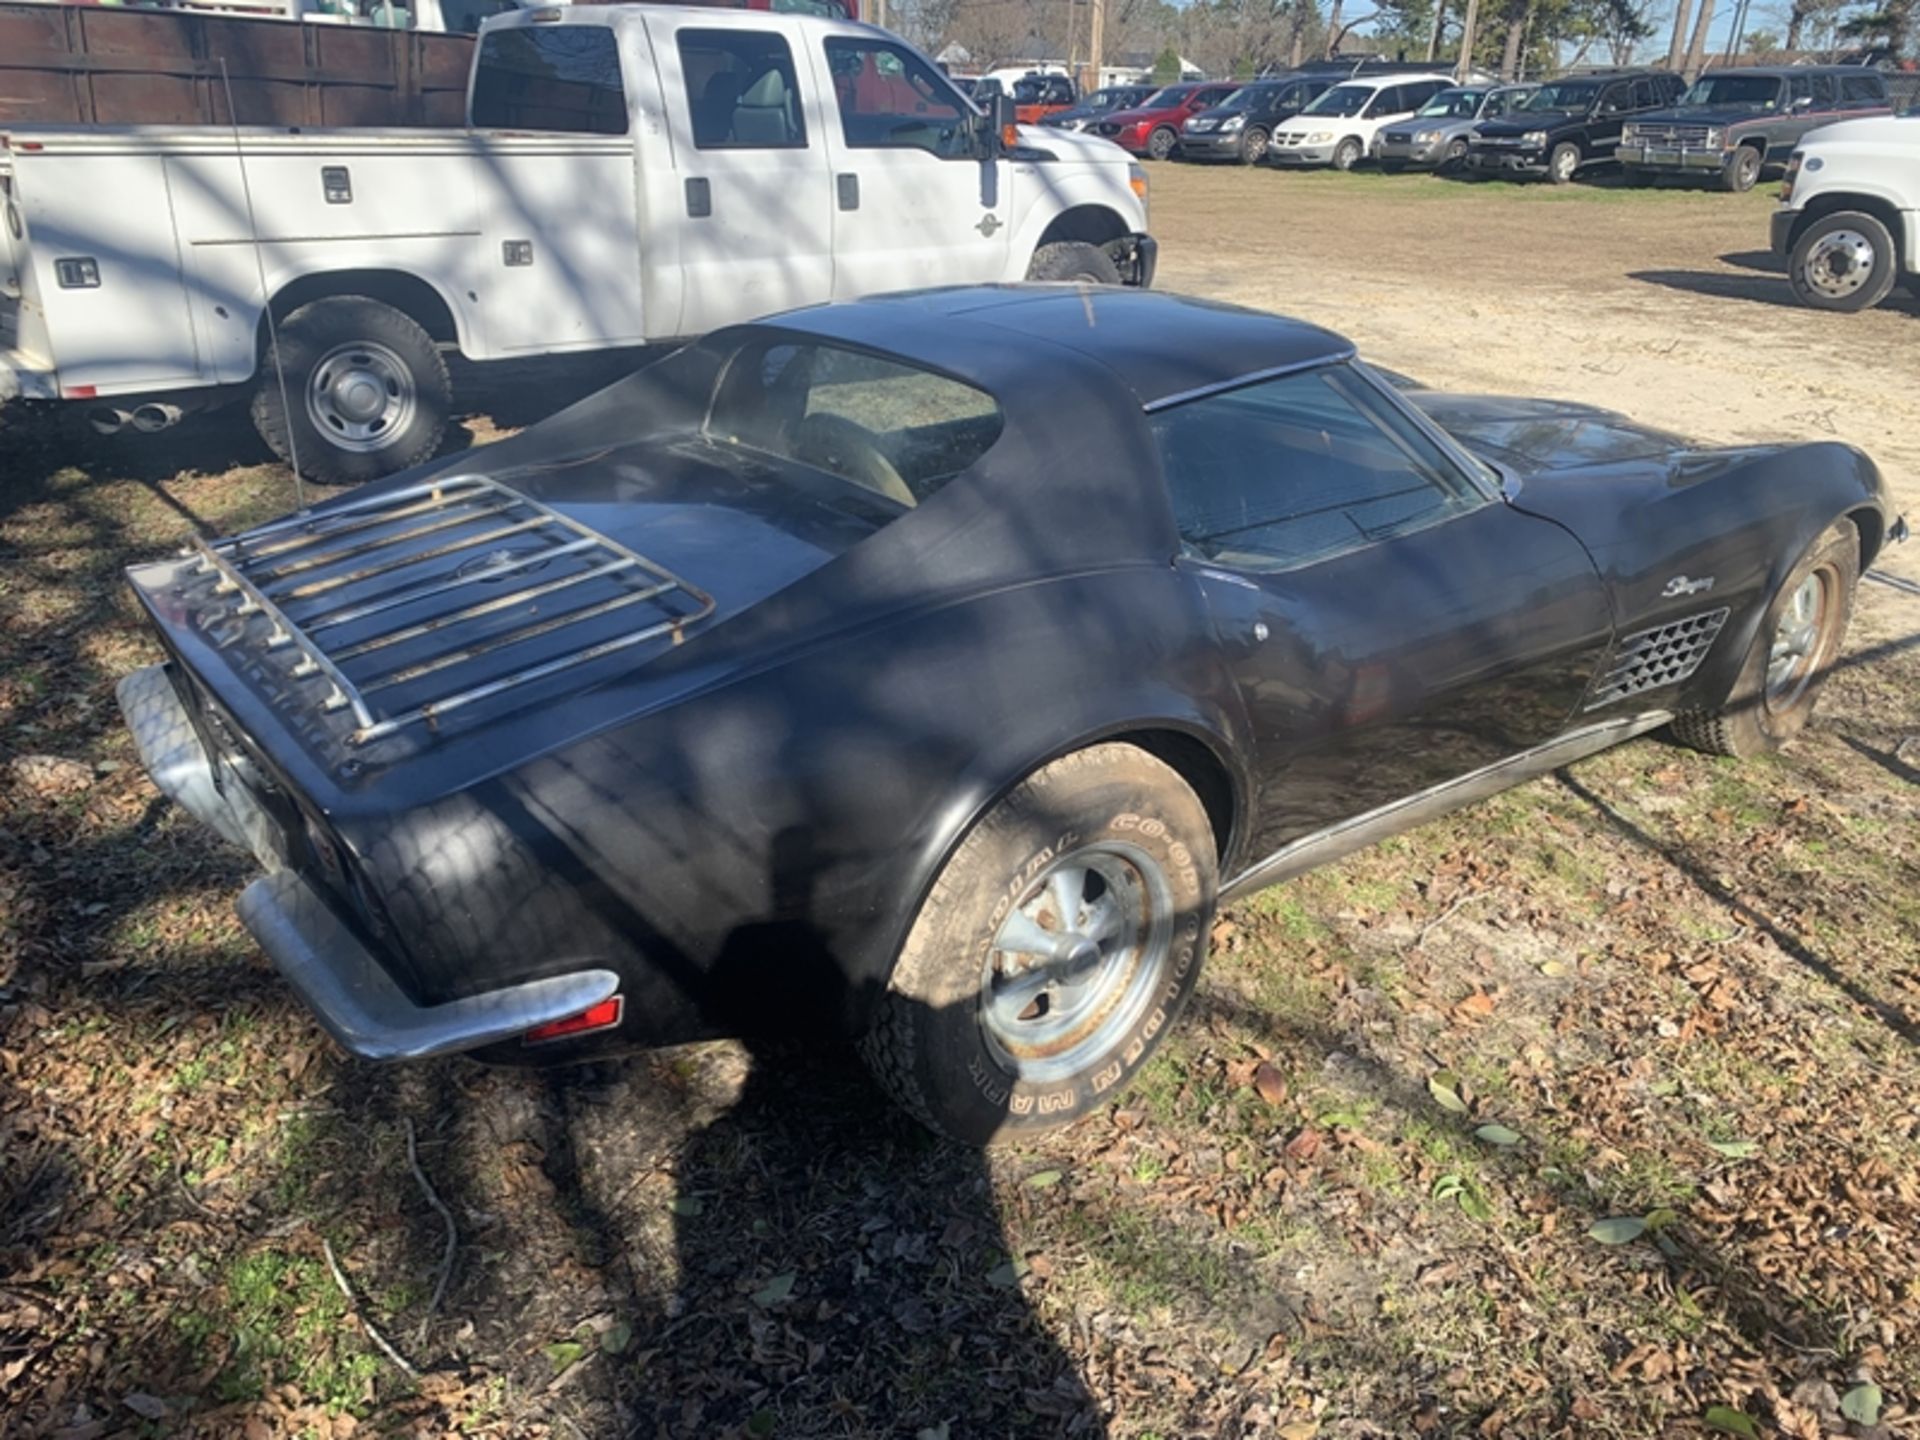 1972 CHEVROLET Corvette Stingray 4-speed manual, 350 V8 - unknown miles - has been sitting up and - Image 3 of 11